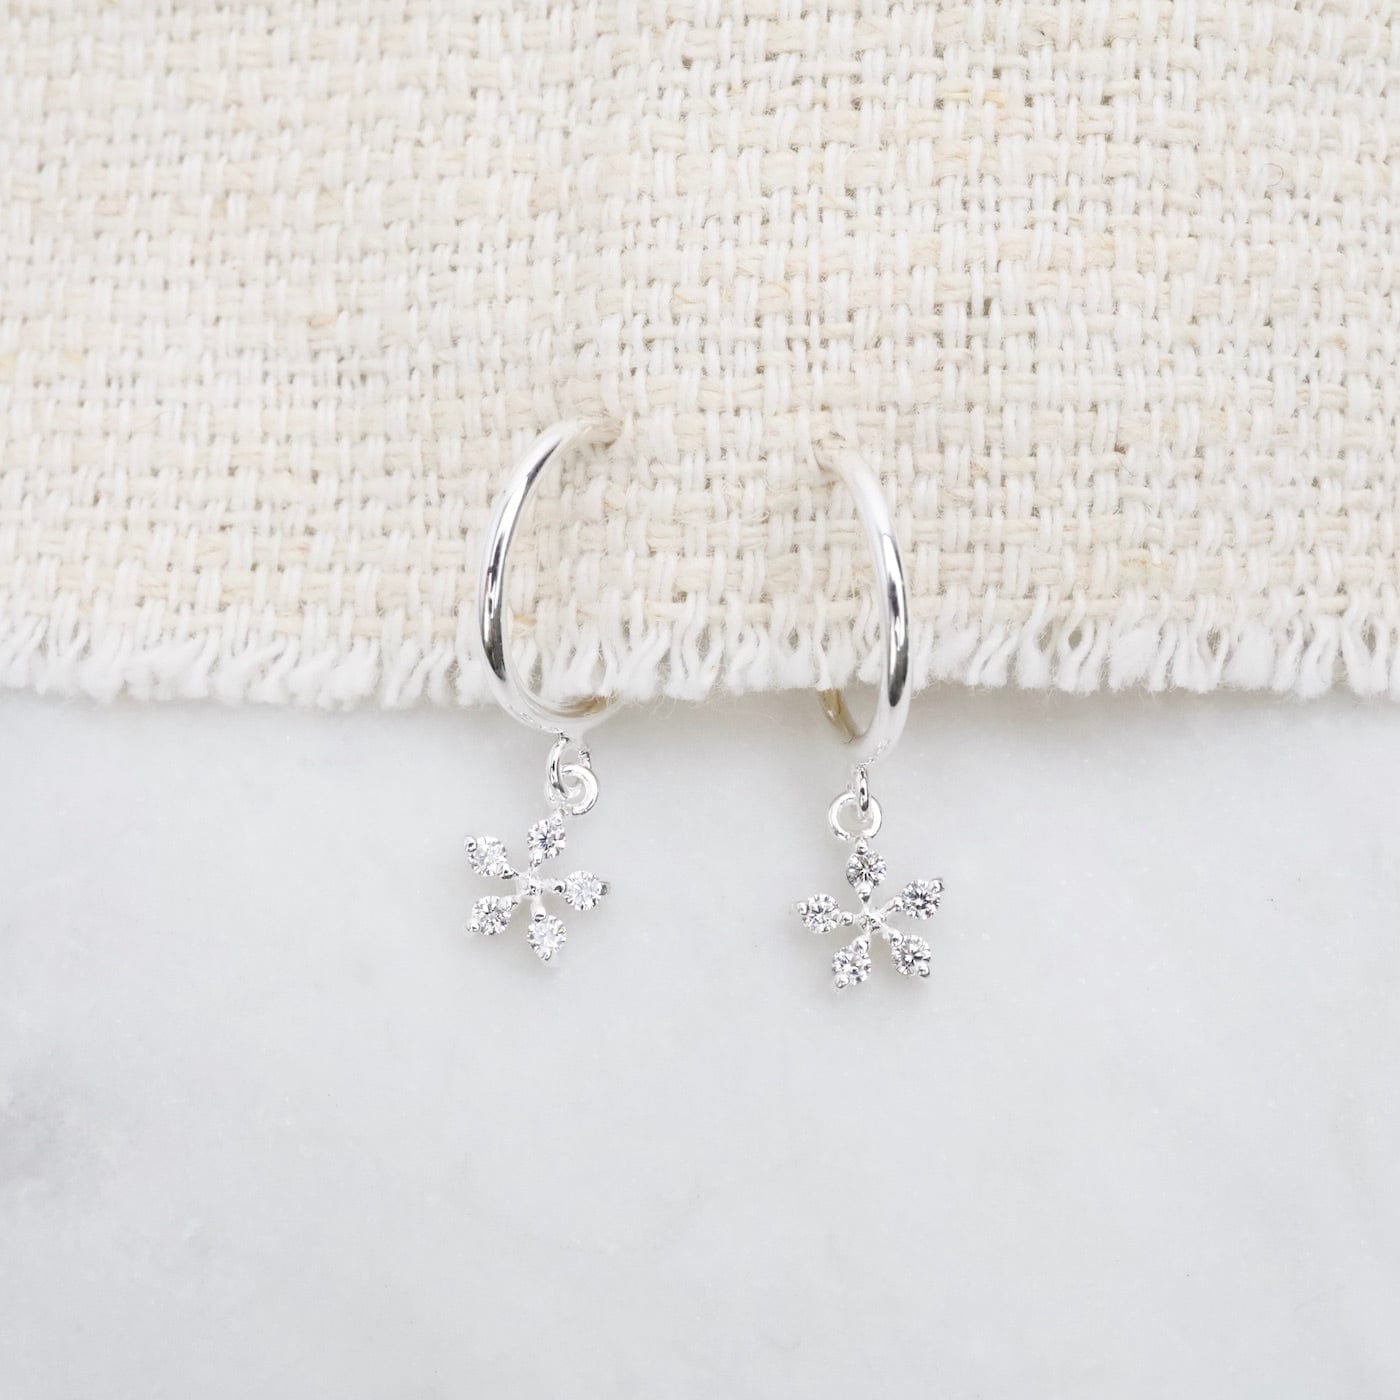 EAR Hoop with Hanging CZ Flower - Sterling Silver